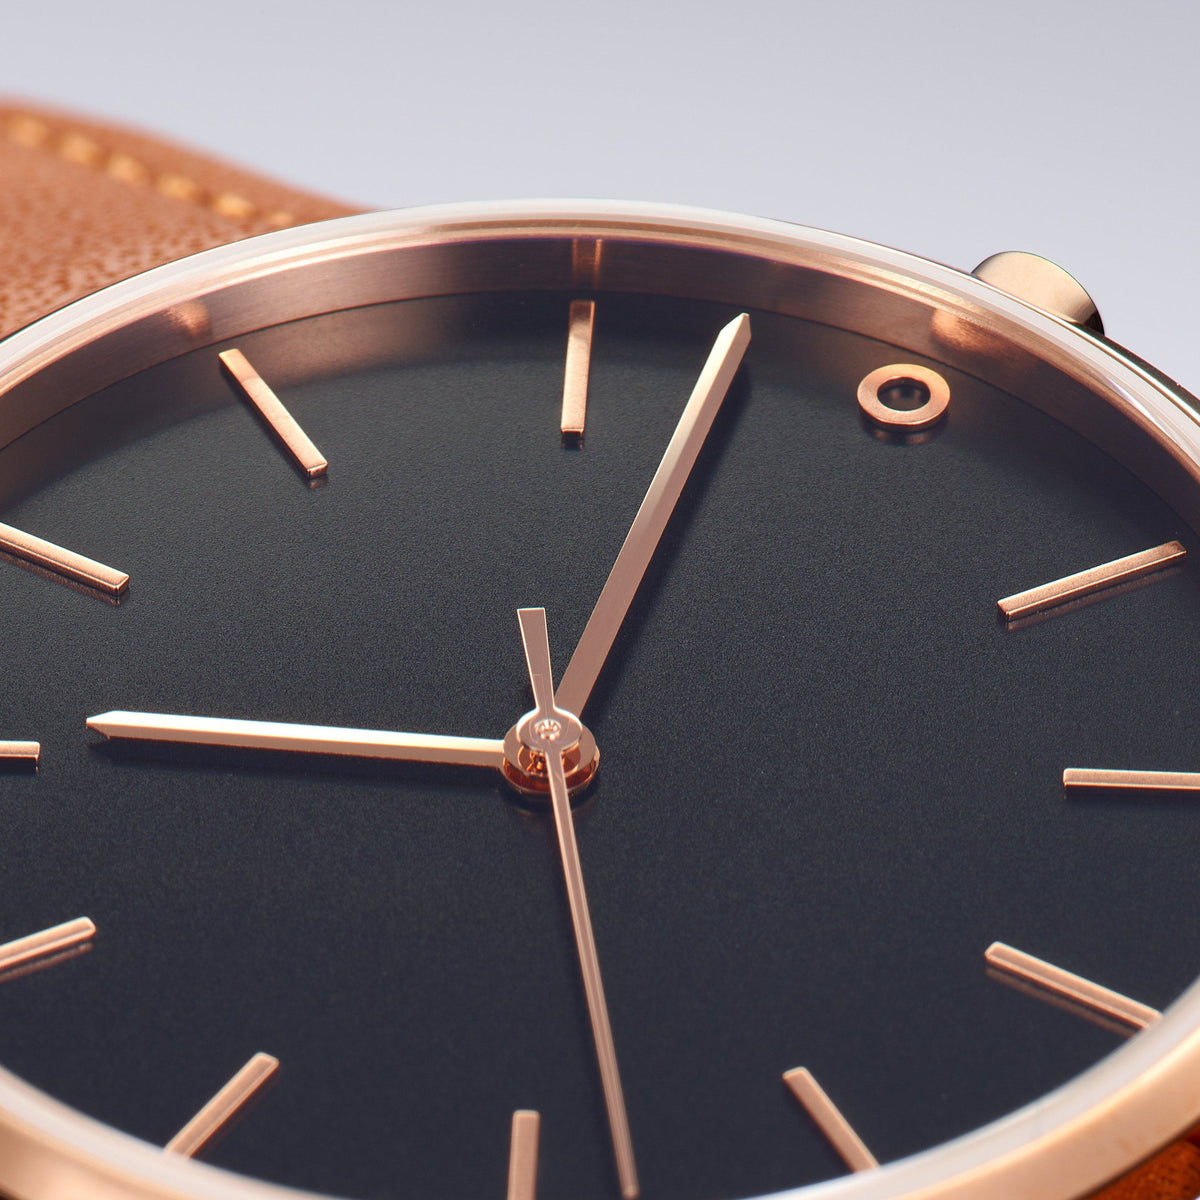 The Black and Rose Gold Watch - Mesh